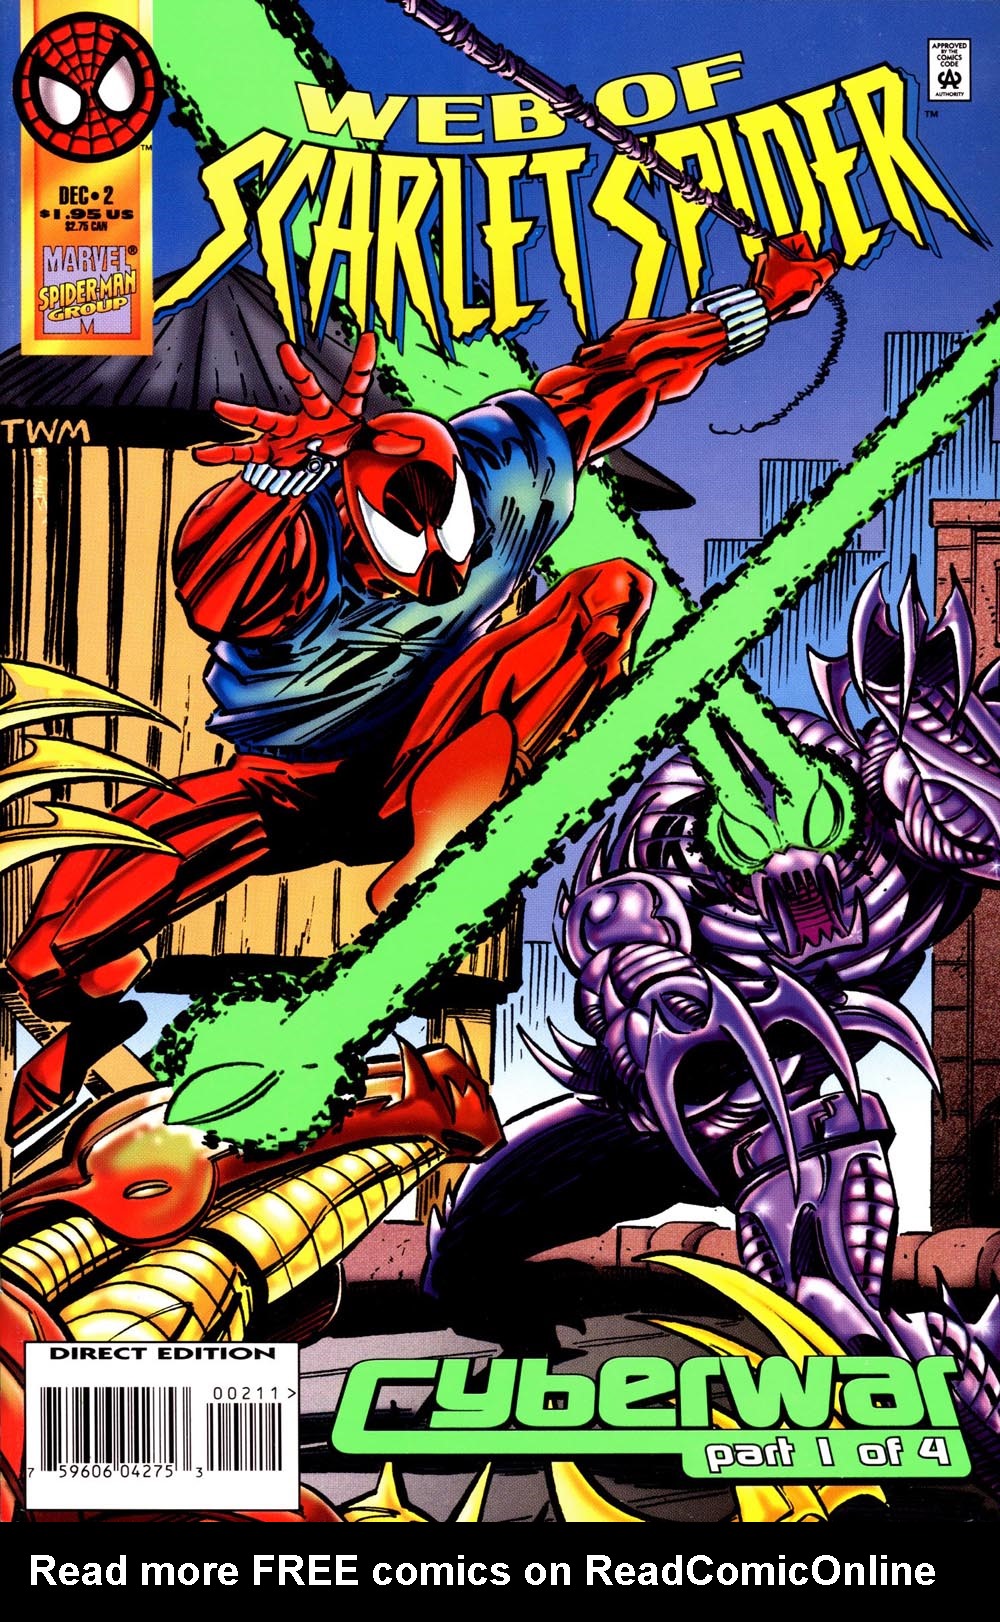 Read online Web of Scarlet Spider comic -  Issue #2 - 1